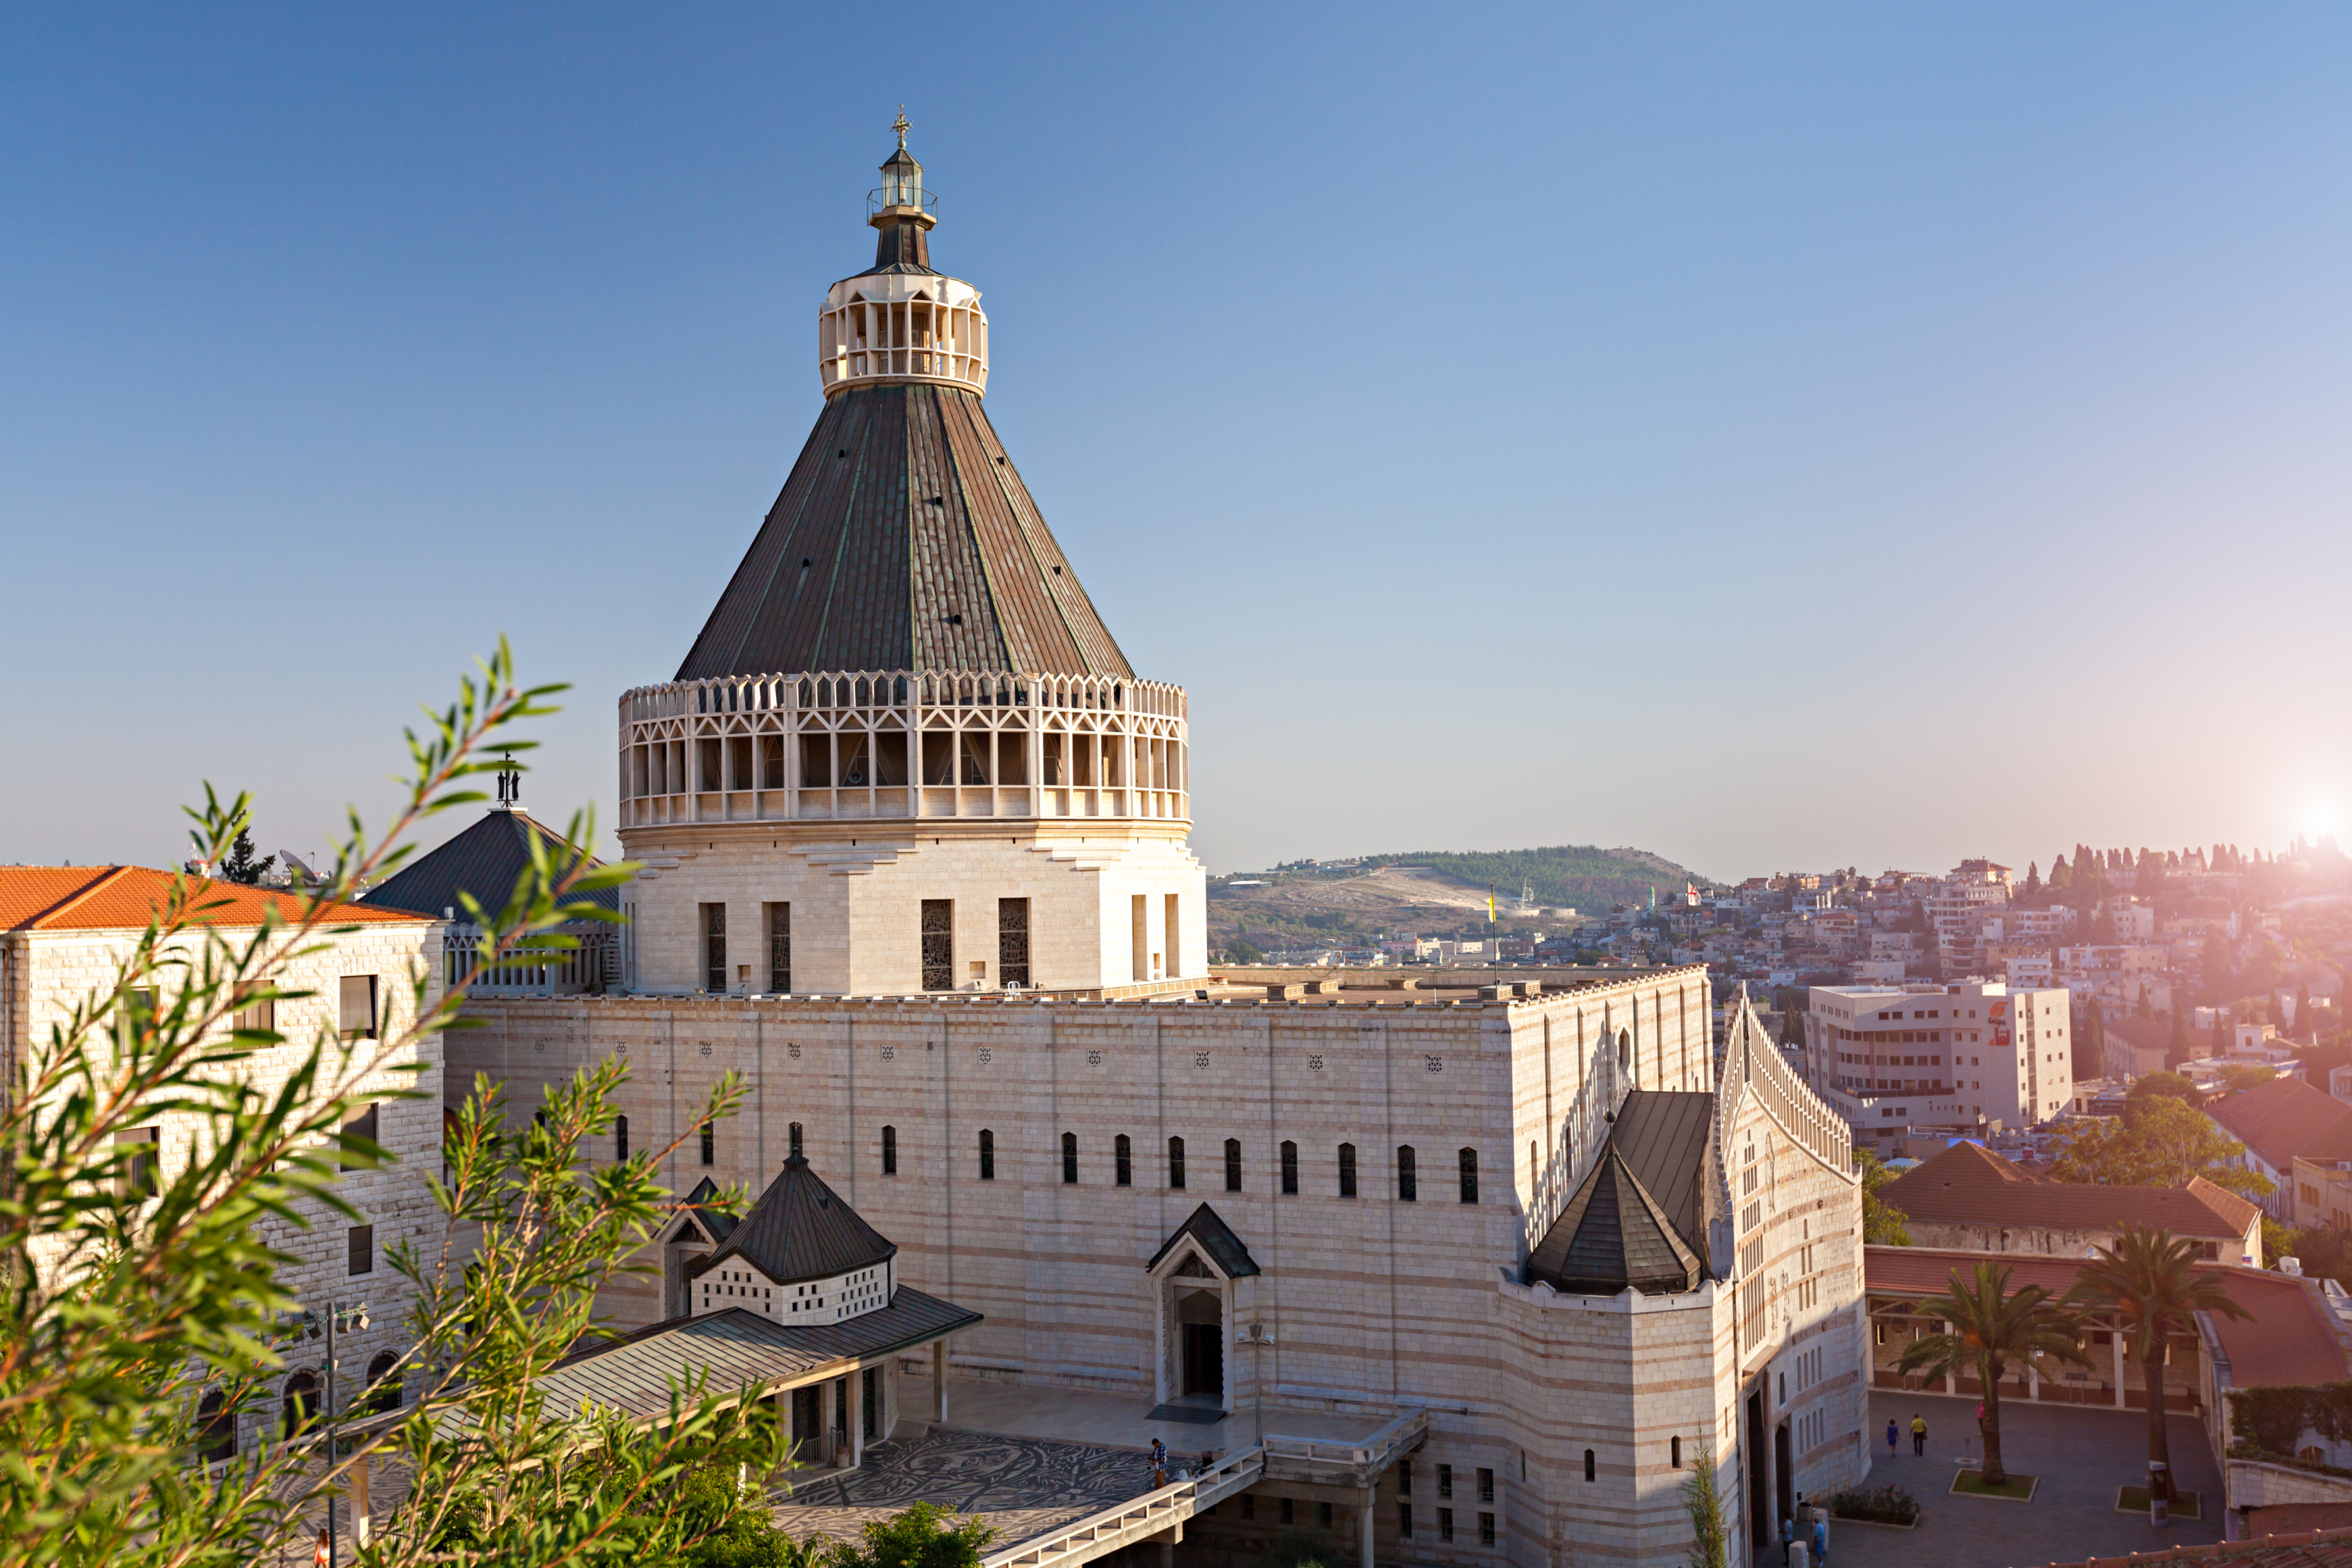 Basilica of the Annunciation | Nazareth, Israel Attractions - Lonely Planet